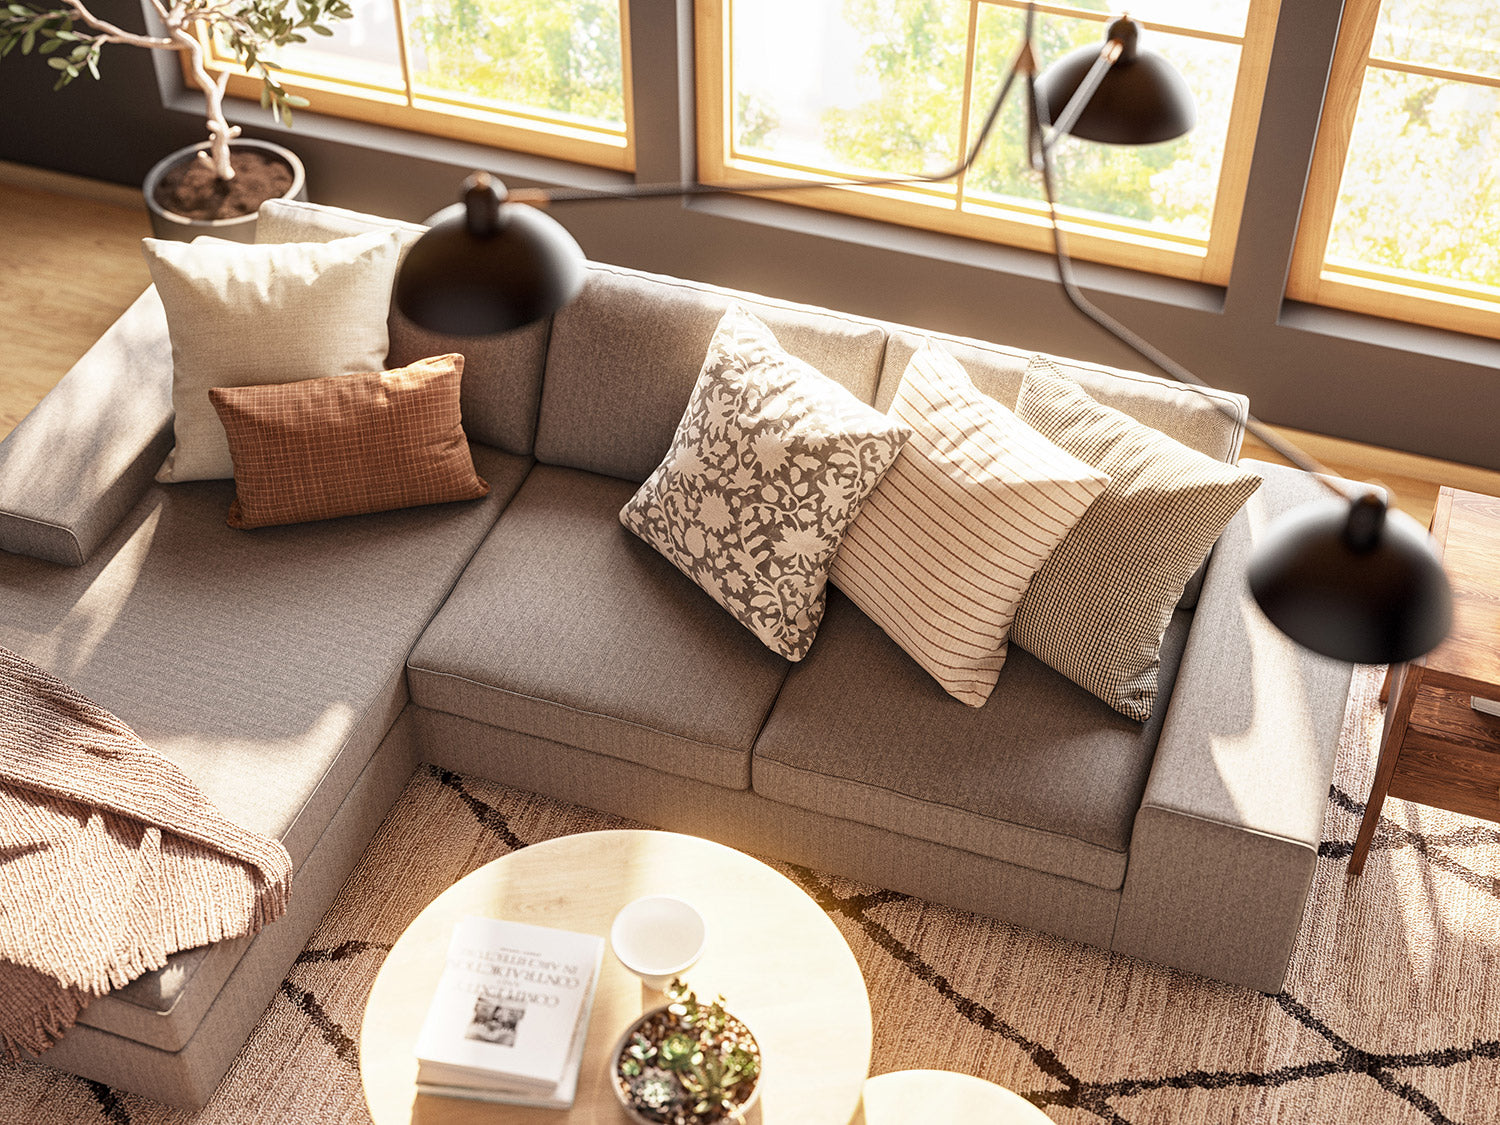 IRL: Blumen Chaise Left Sectional in Mahonia Pewter fabric, Voya Coffee and Side Tables, Mayer Poufs in Sundance leather, and Lulu & Judge Throw Pillows